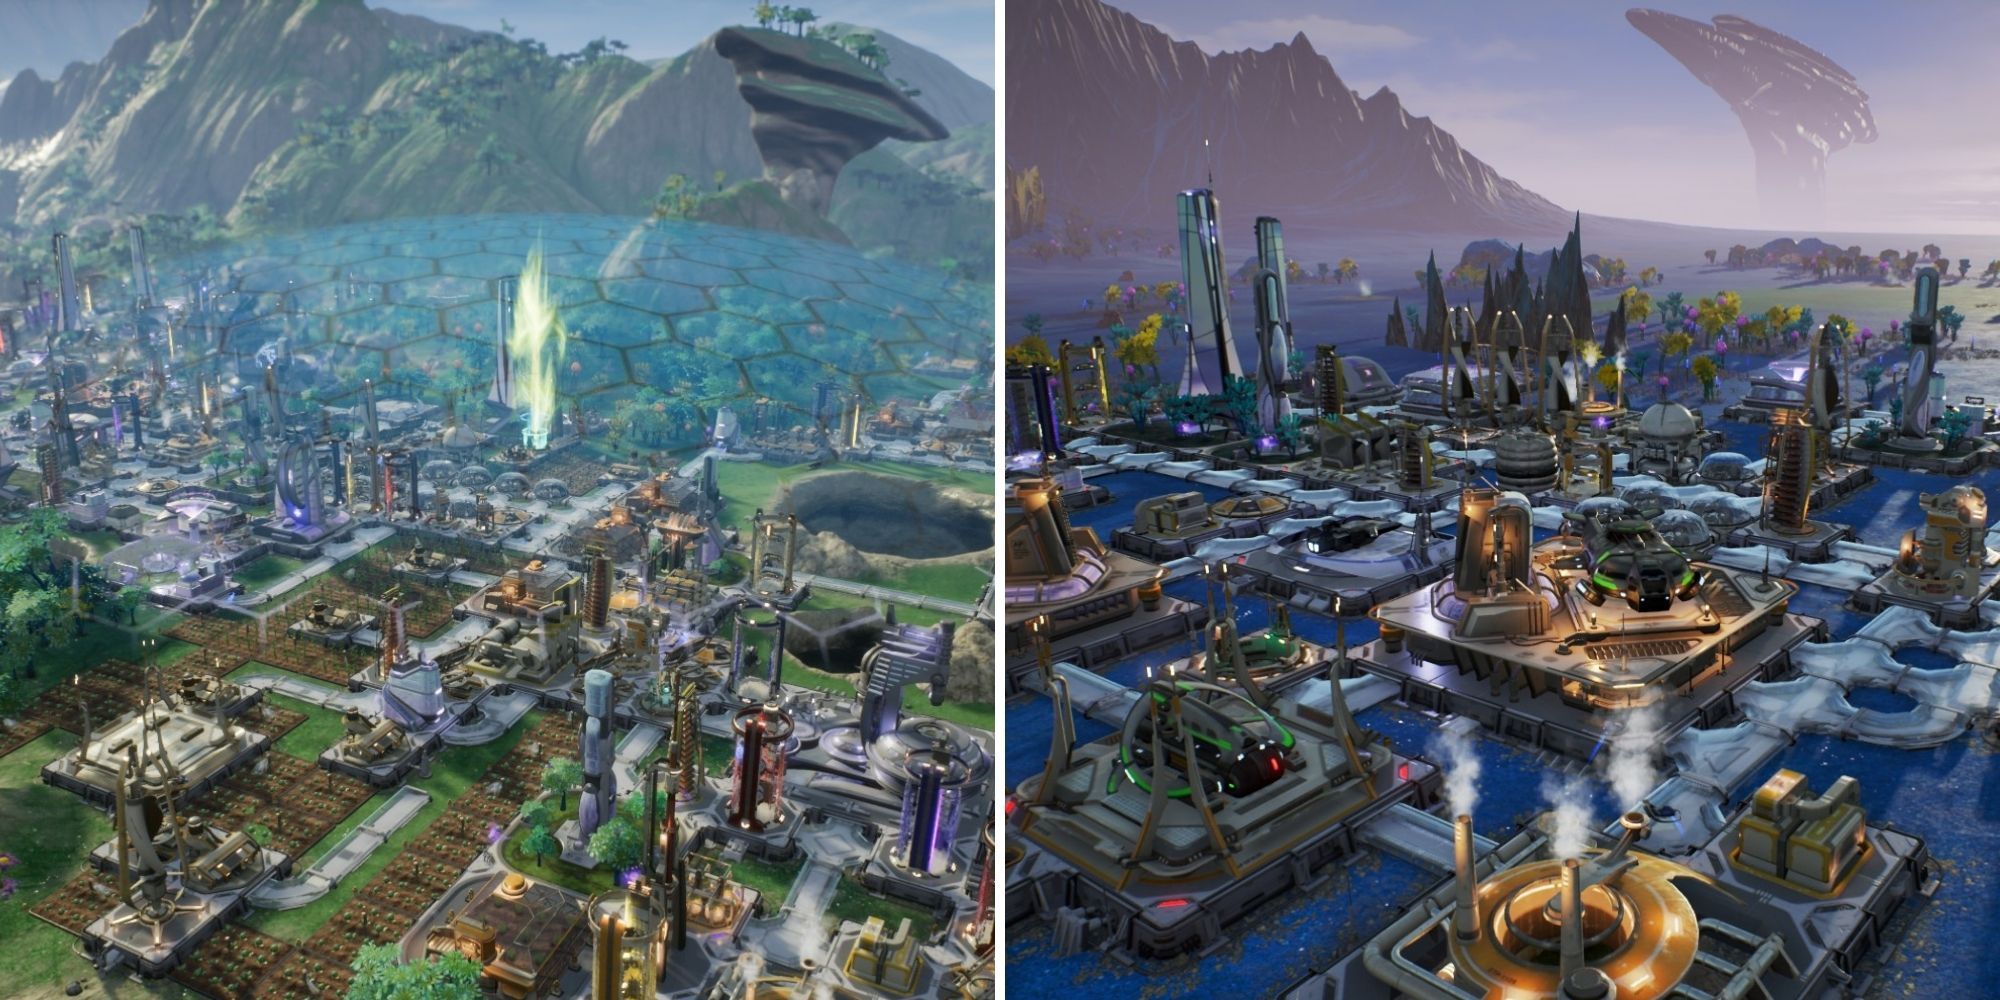 On the left is a greener planet with farms while on the right is a dark planet with machinery in Aven Colony